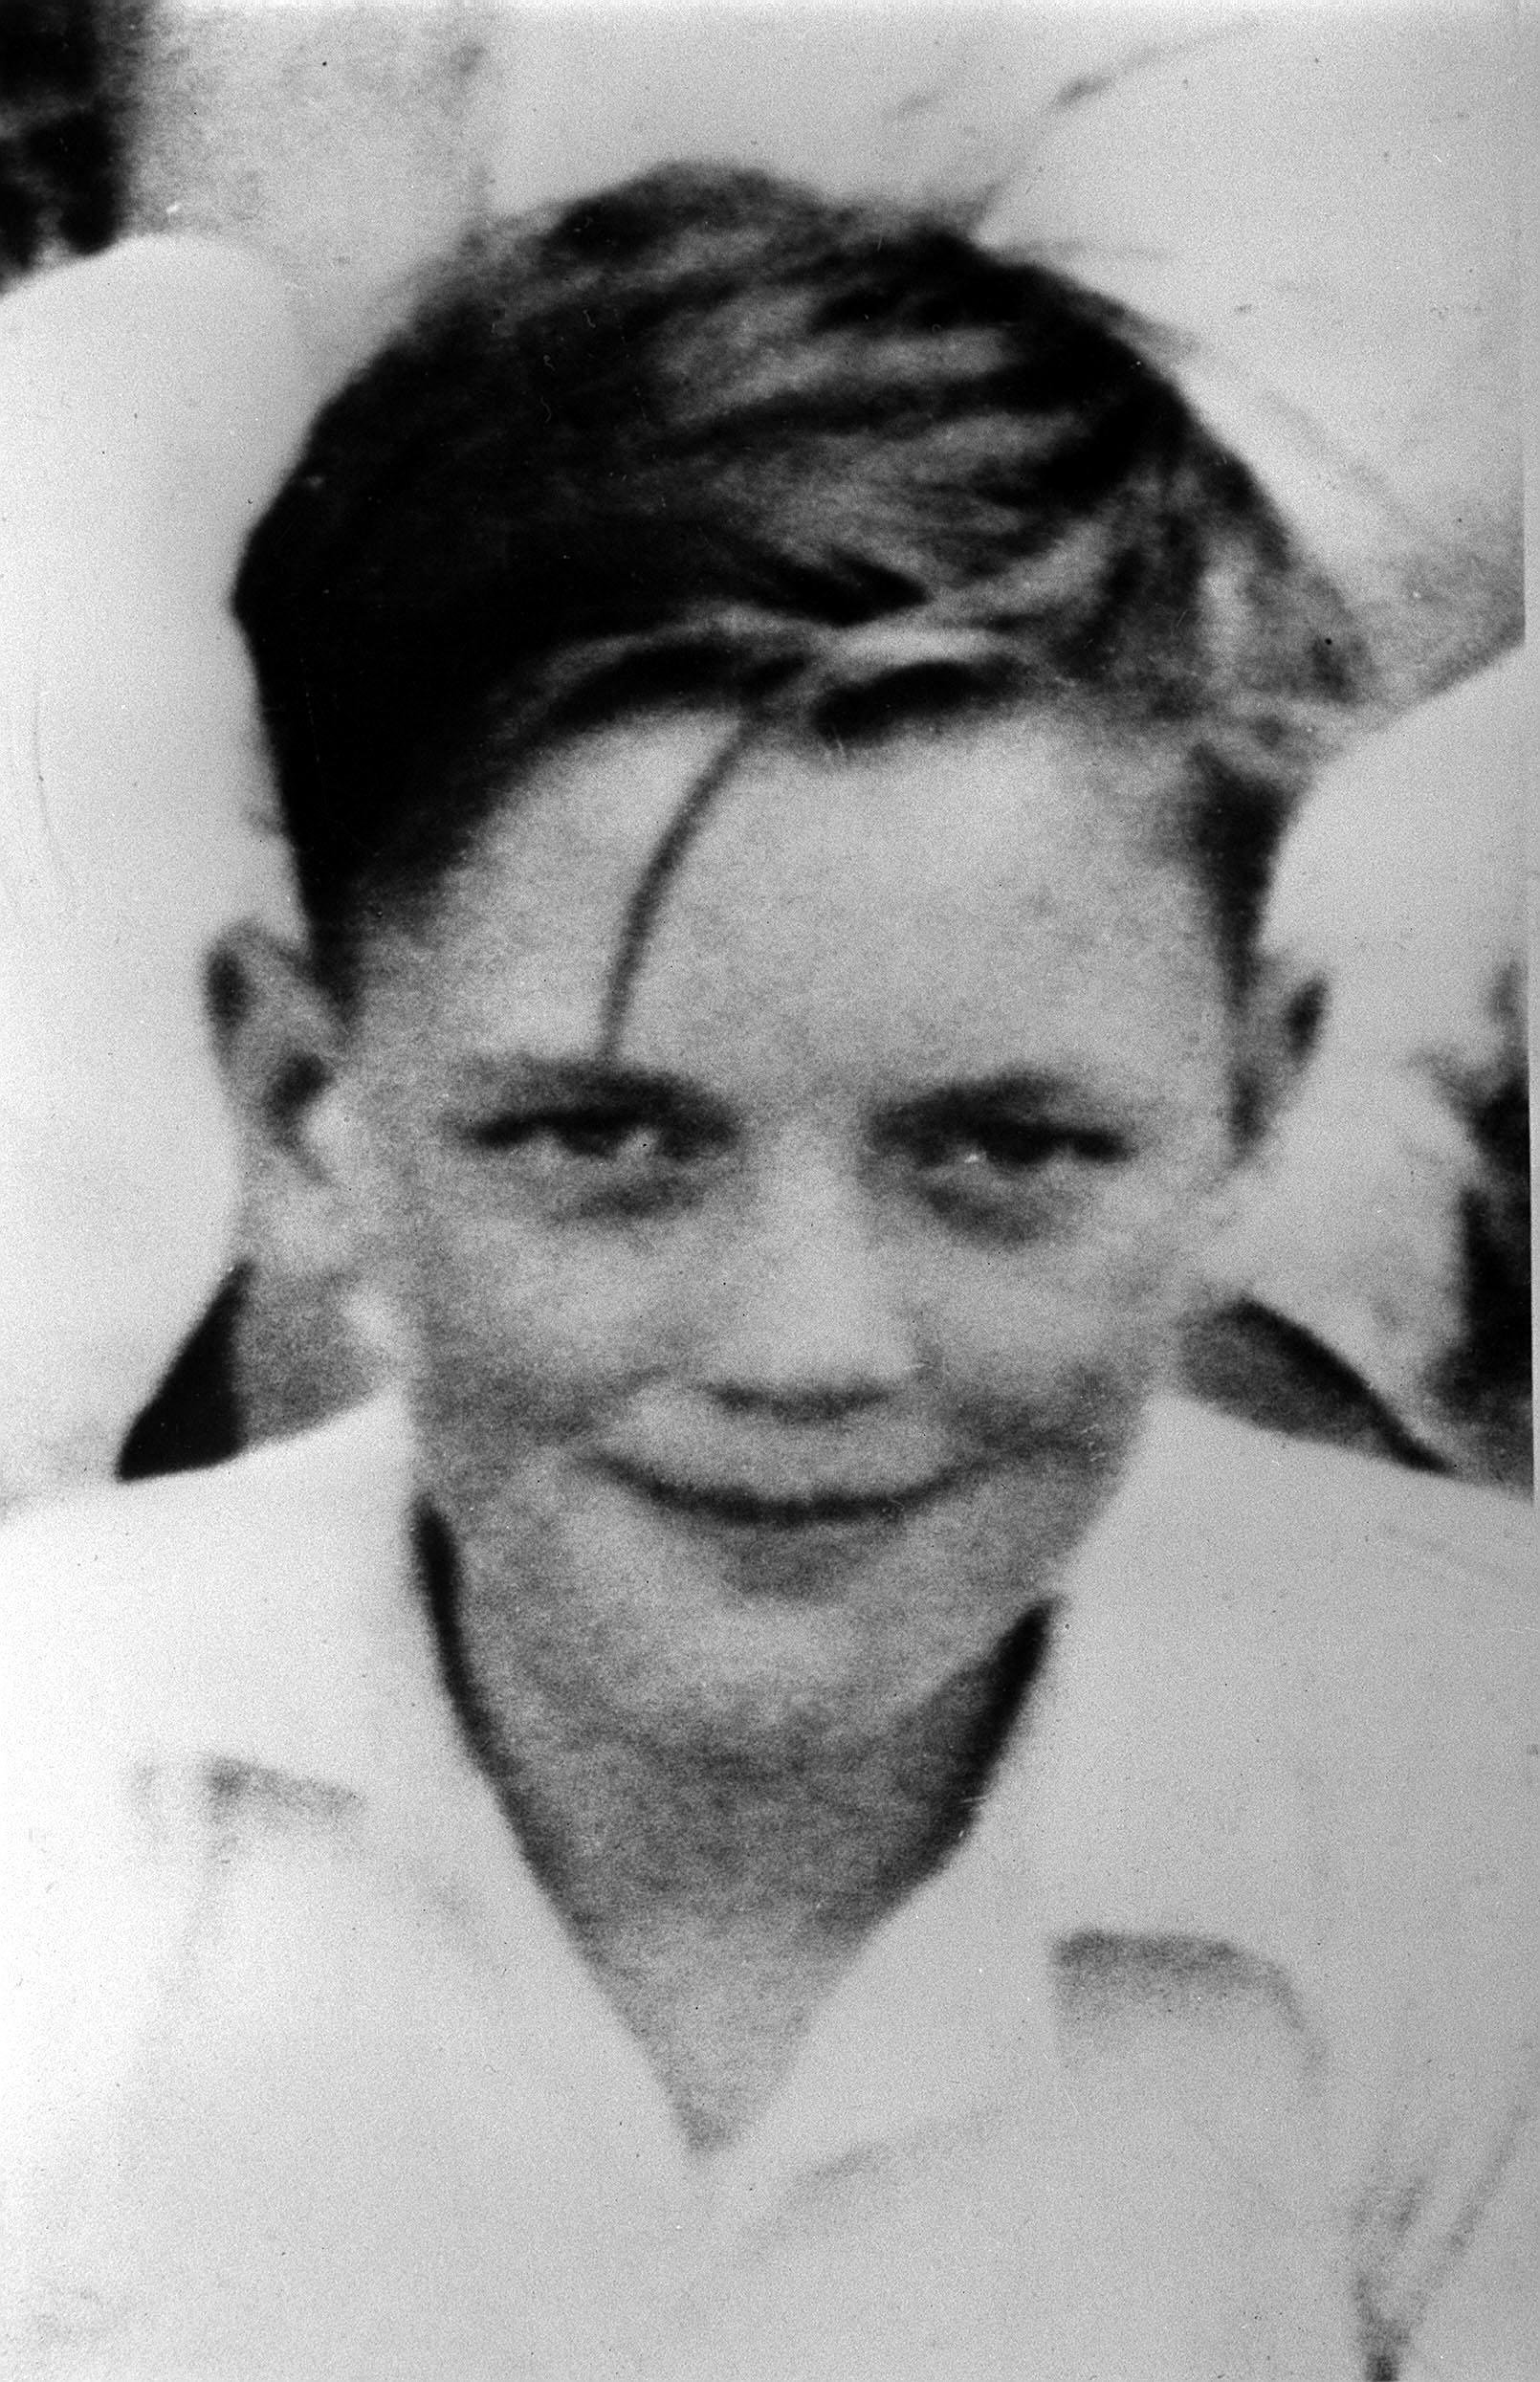 <strong>John Kilbride was just 12 years old when he was murdered by Brady&nbsp;</strong>